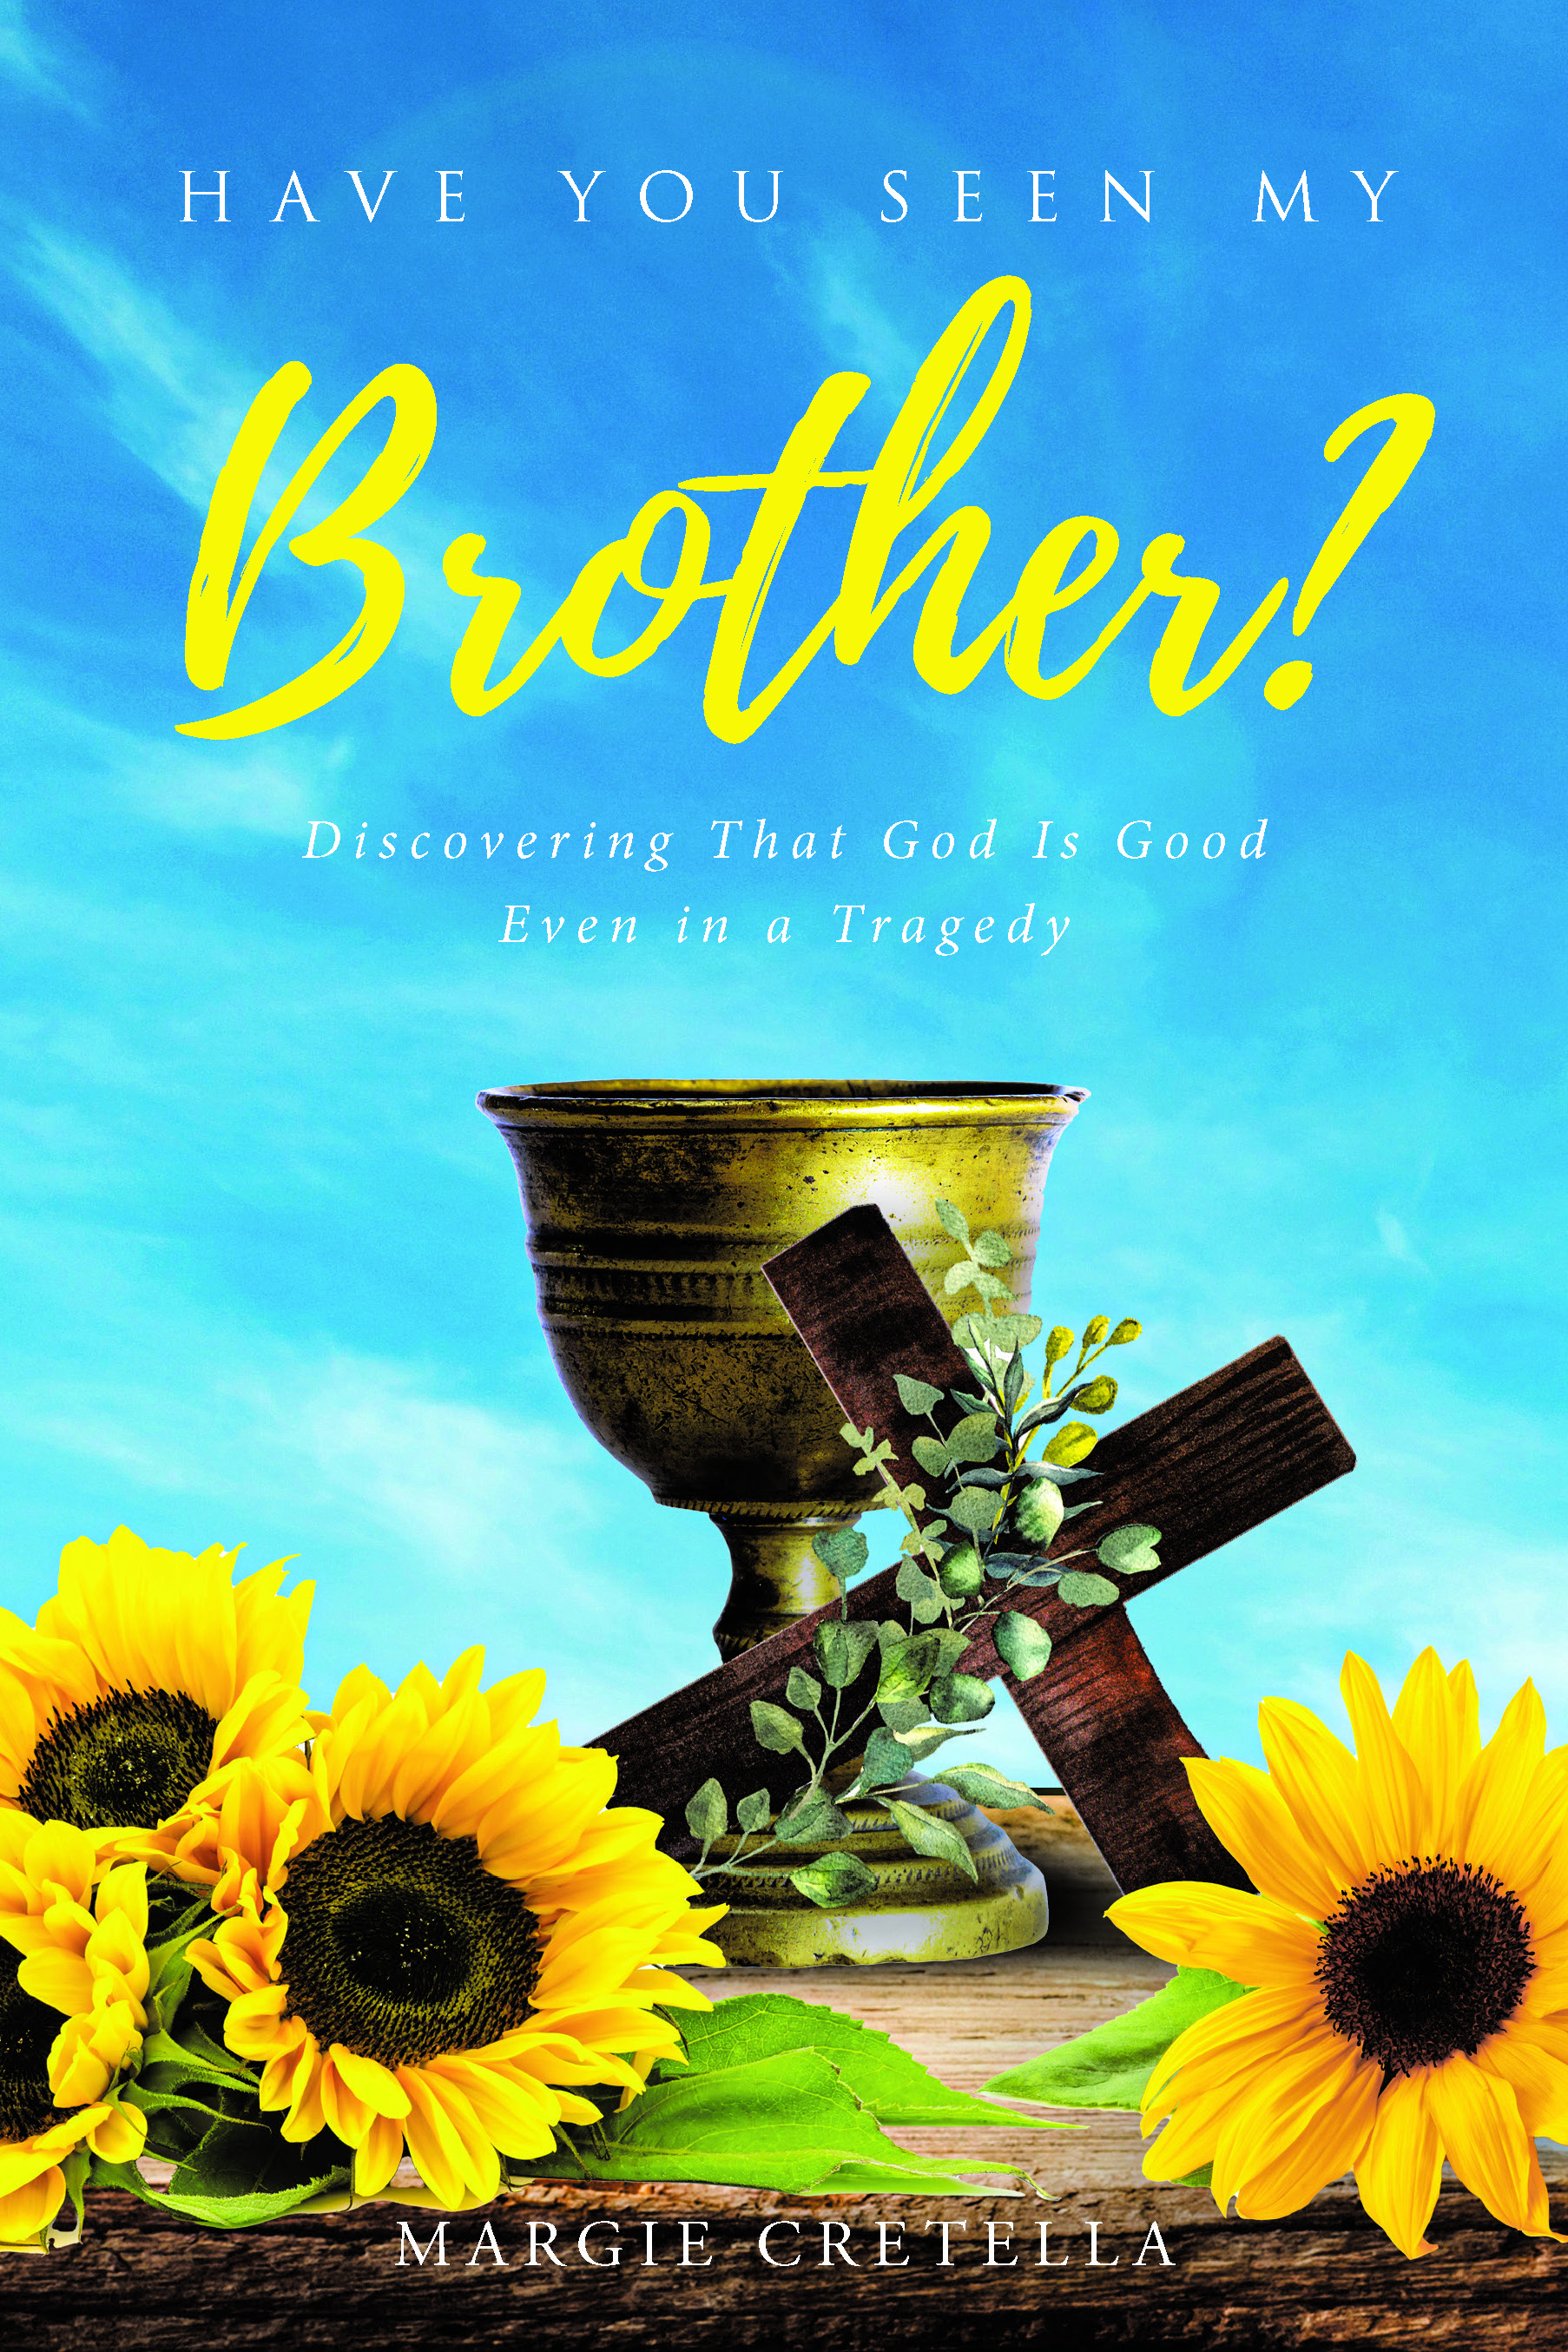 Margie Cretella’s Newly Released “Have You Seen My Brother?: Discovering That God Is Good Even in a Tragedy” Shines a Light of Hope Amidst Darkness